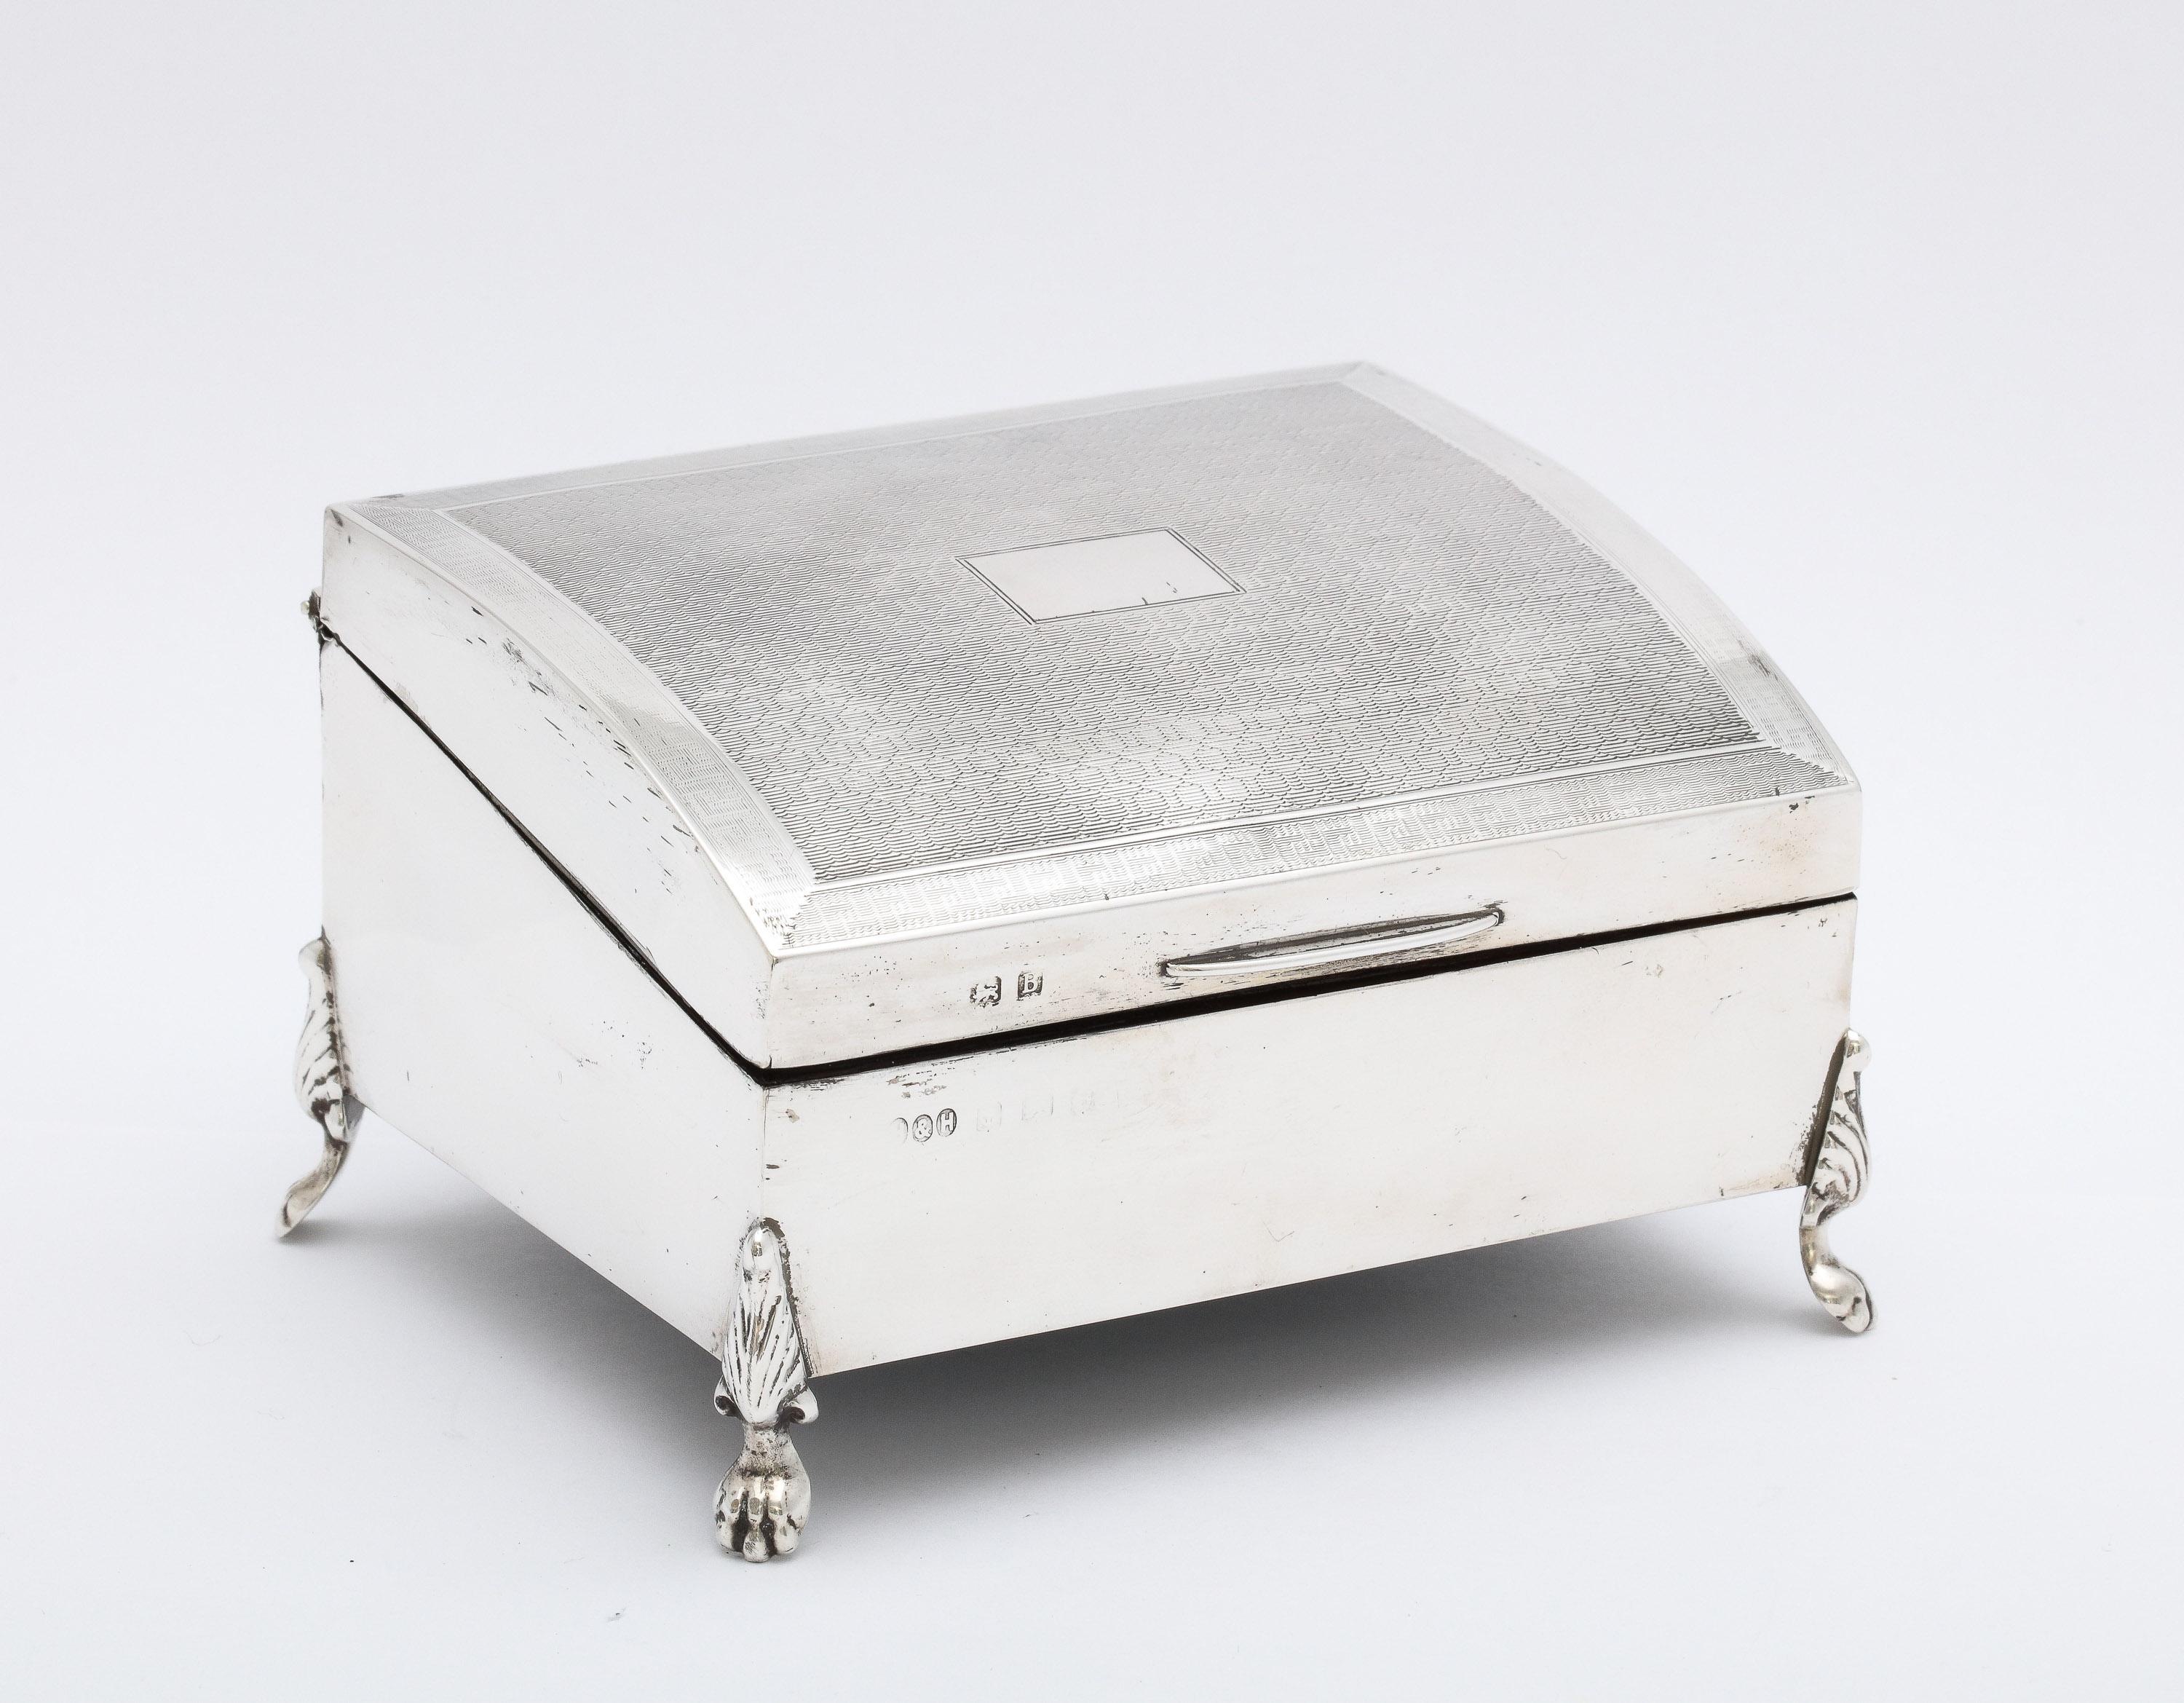 Art Deco Period, sterling silver, paw-footed, engine-turned-designed table box with with hinged lid, Birmingham, England, year-hallmarked for 1926, Hollings and Hutchinson - makers. Box is wood-lined. The wood is fitted on a slant to follow the form